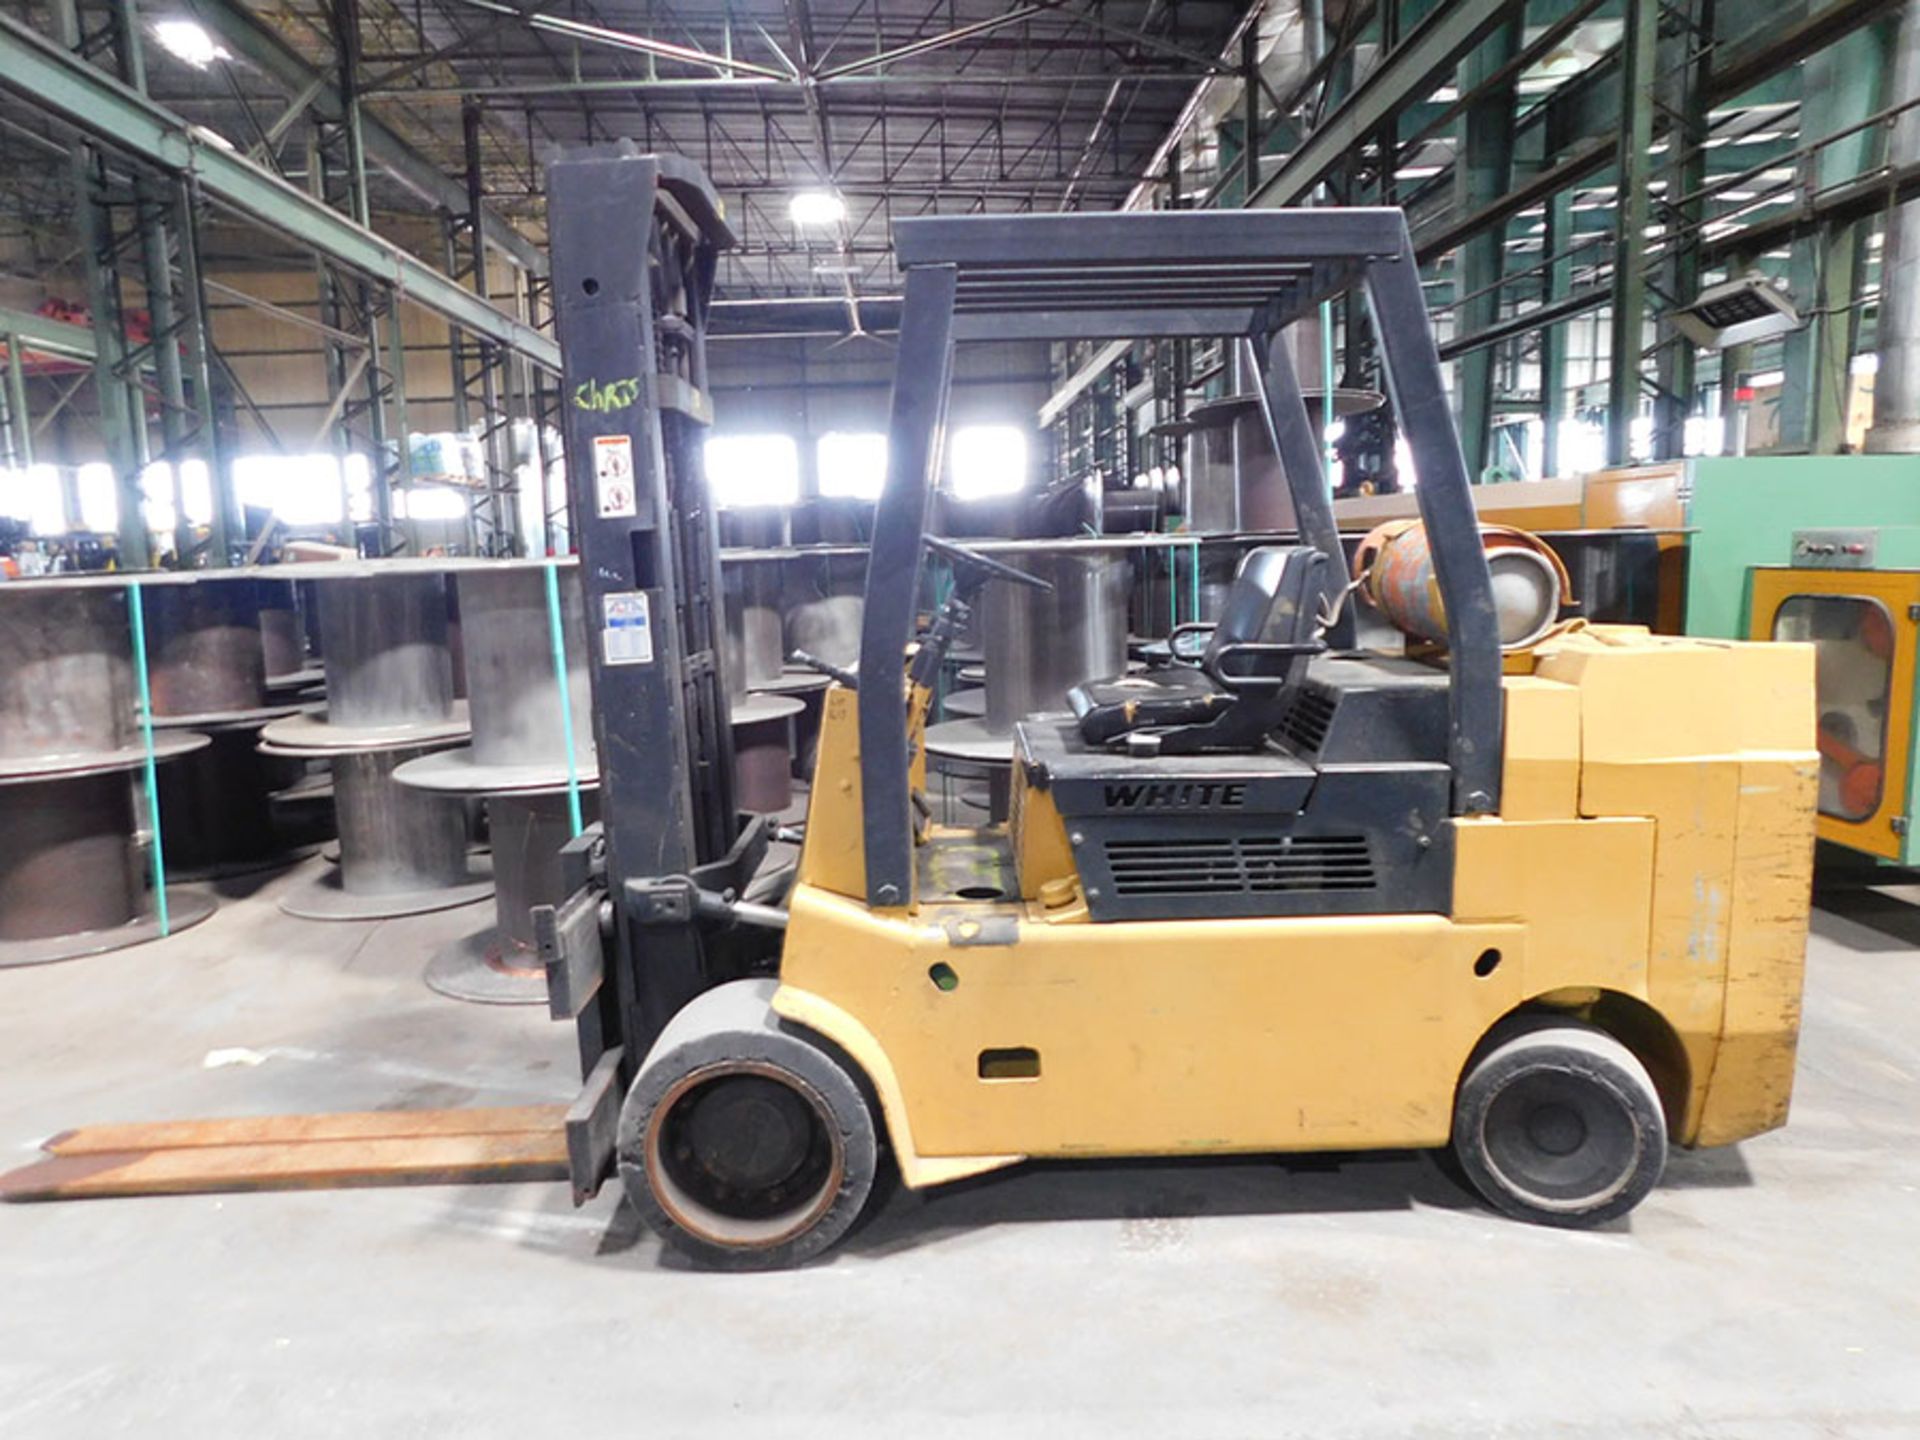 WHITE MA150L 15,000 LB. FORKLIFT; 2-STAGE MAST, 114'' LIFT HEIGHT, LP GAS, SOLID TIRES, S/N 5500485,